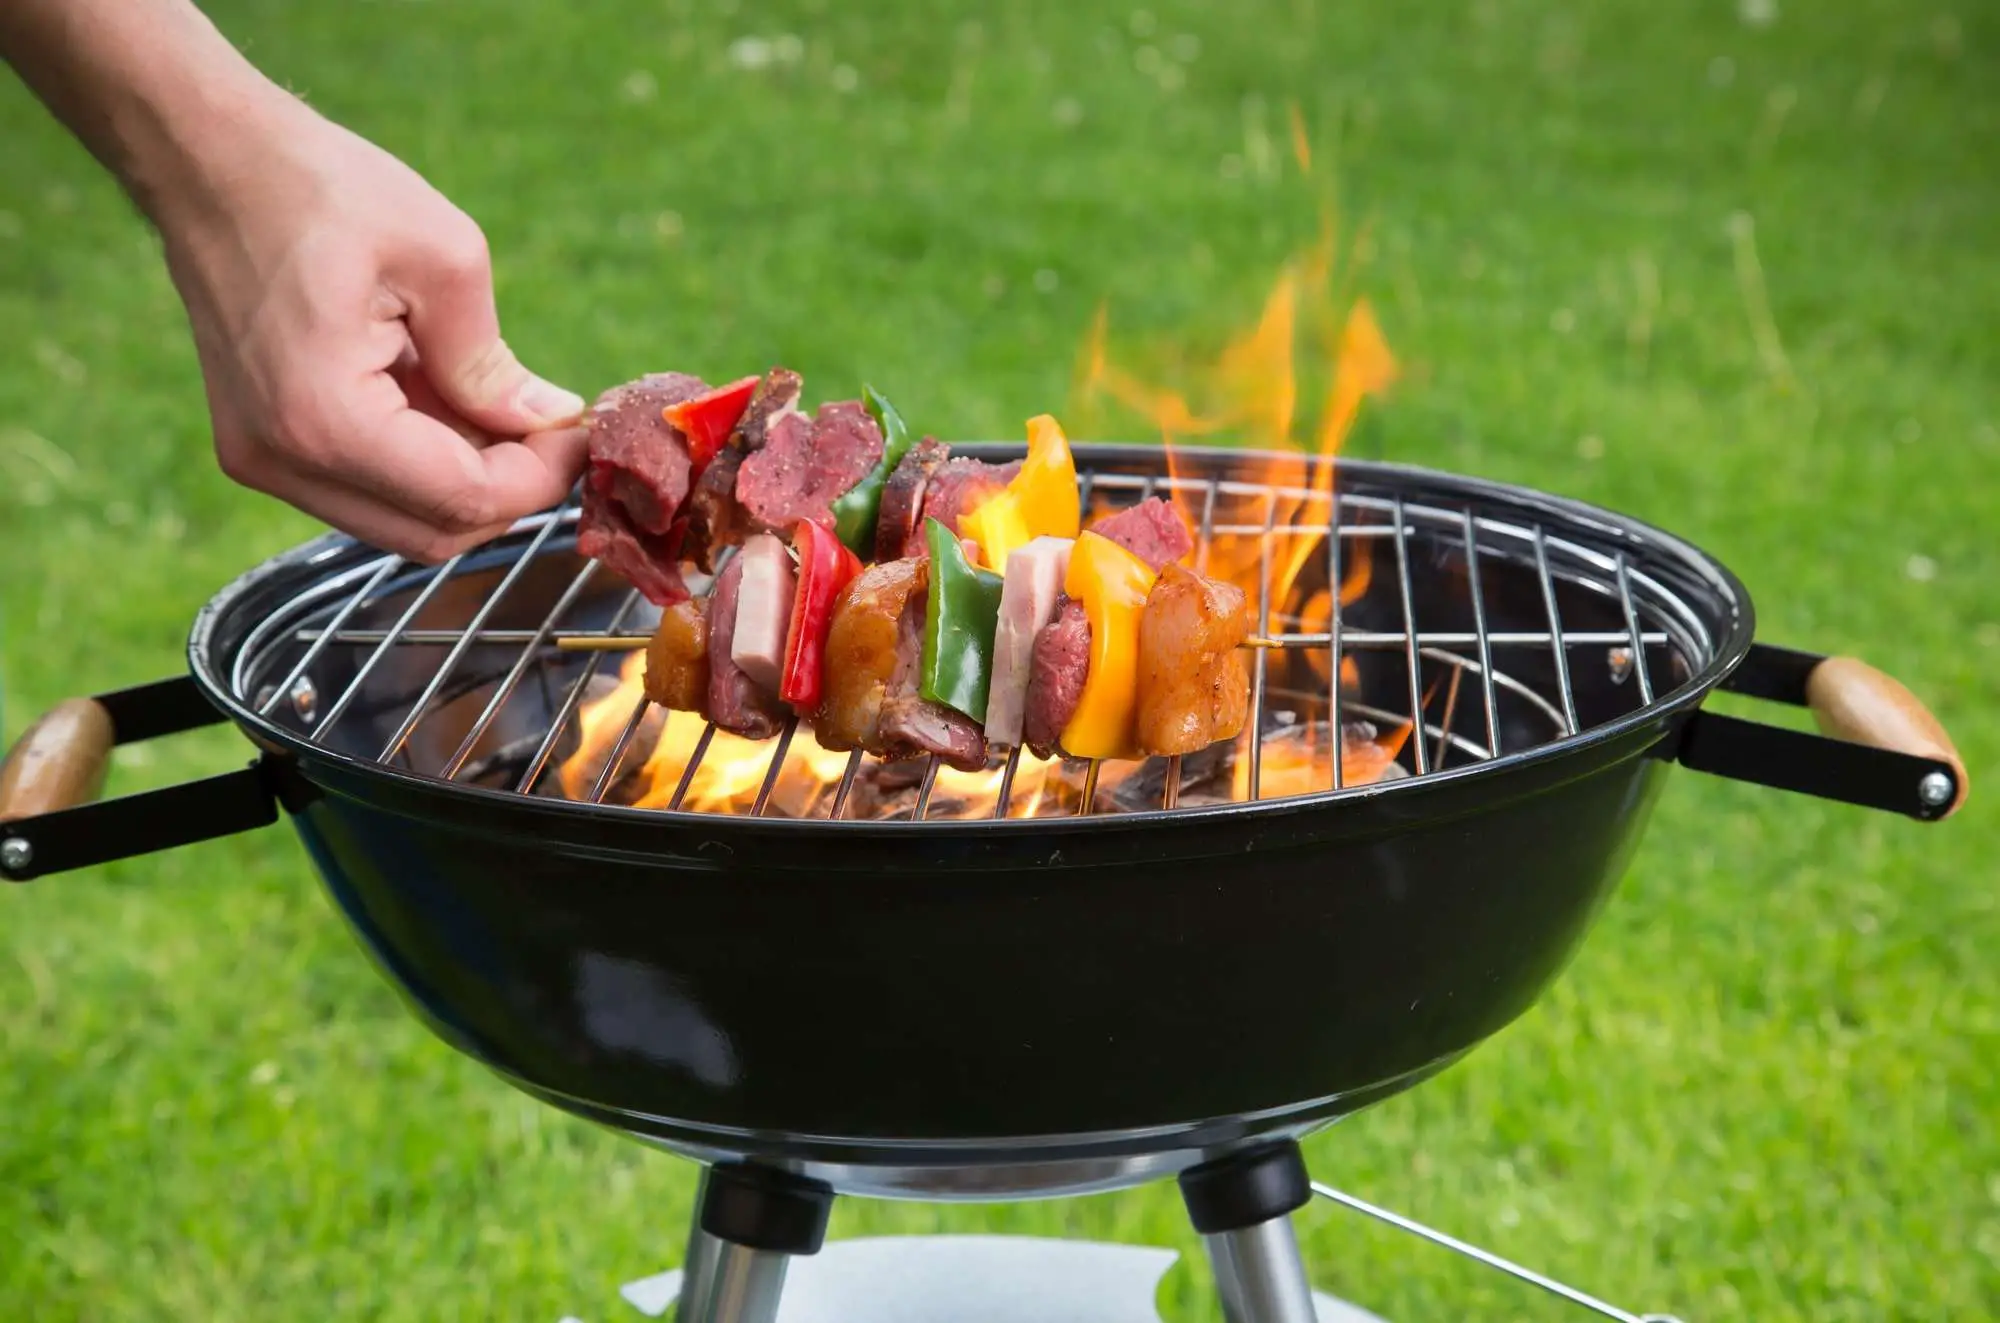 Best Charcoal BBQ Reviews UK 2020